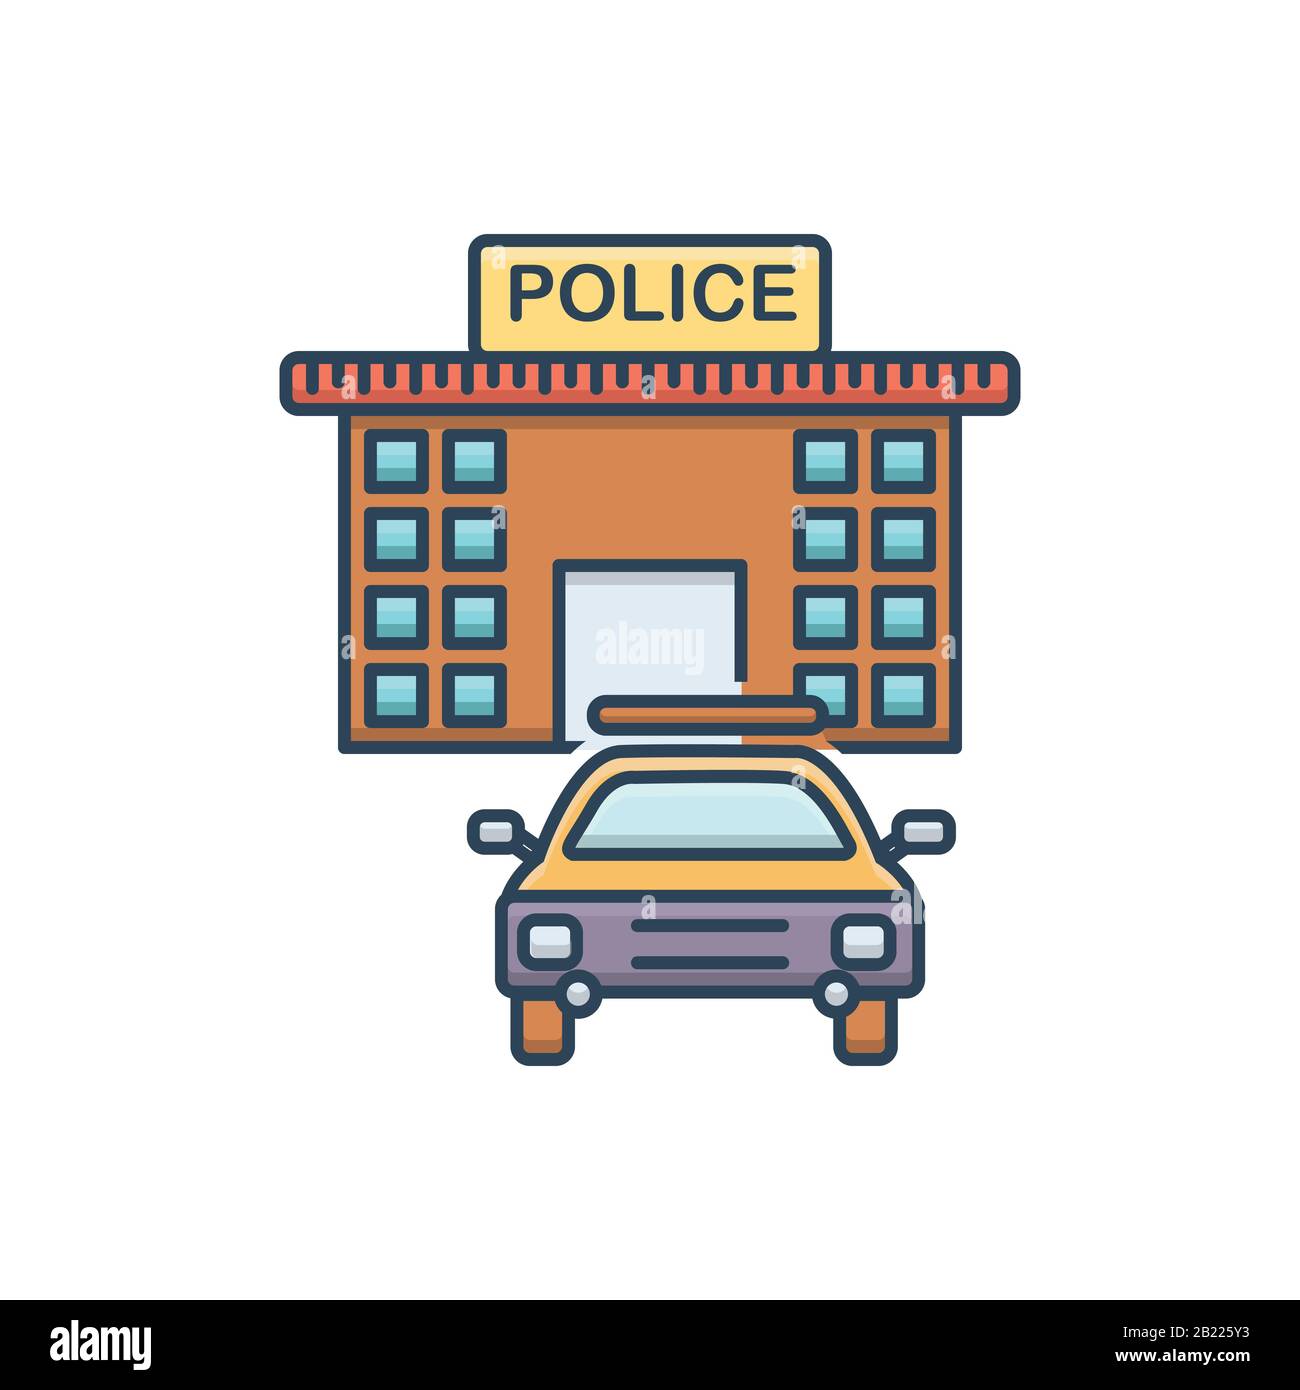 Police station icon Stock Vector